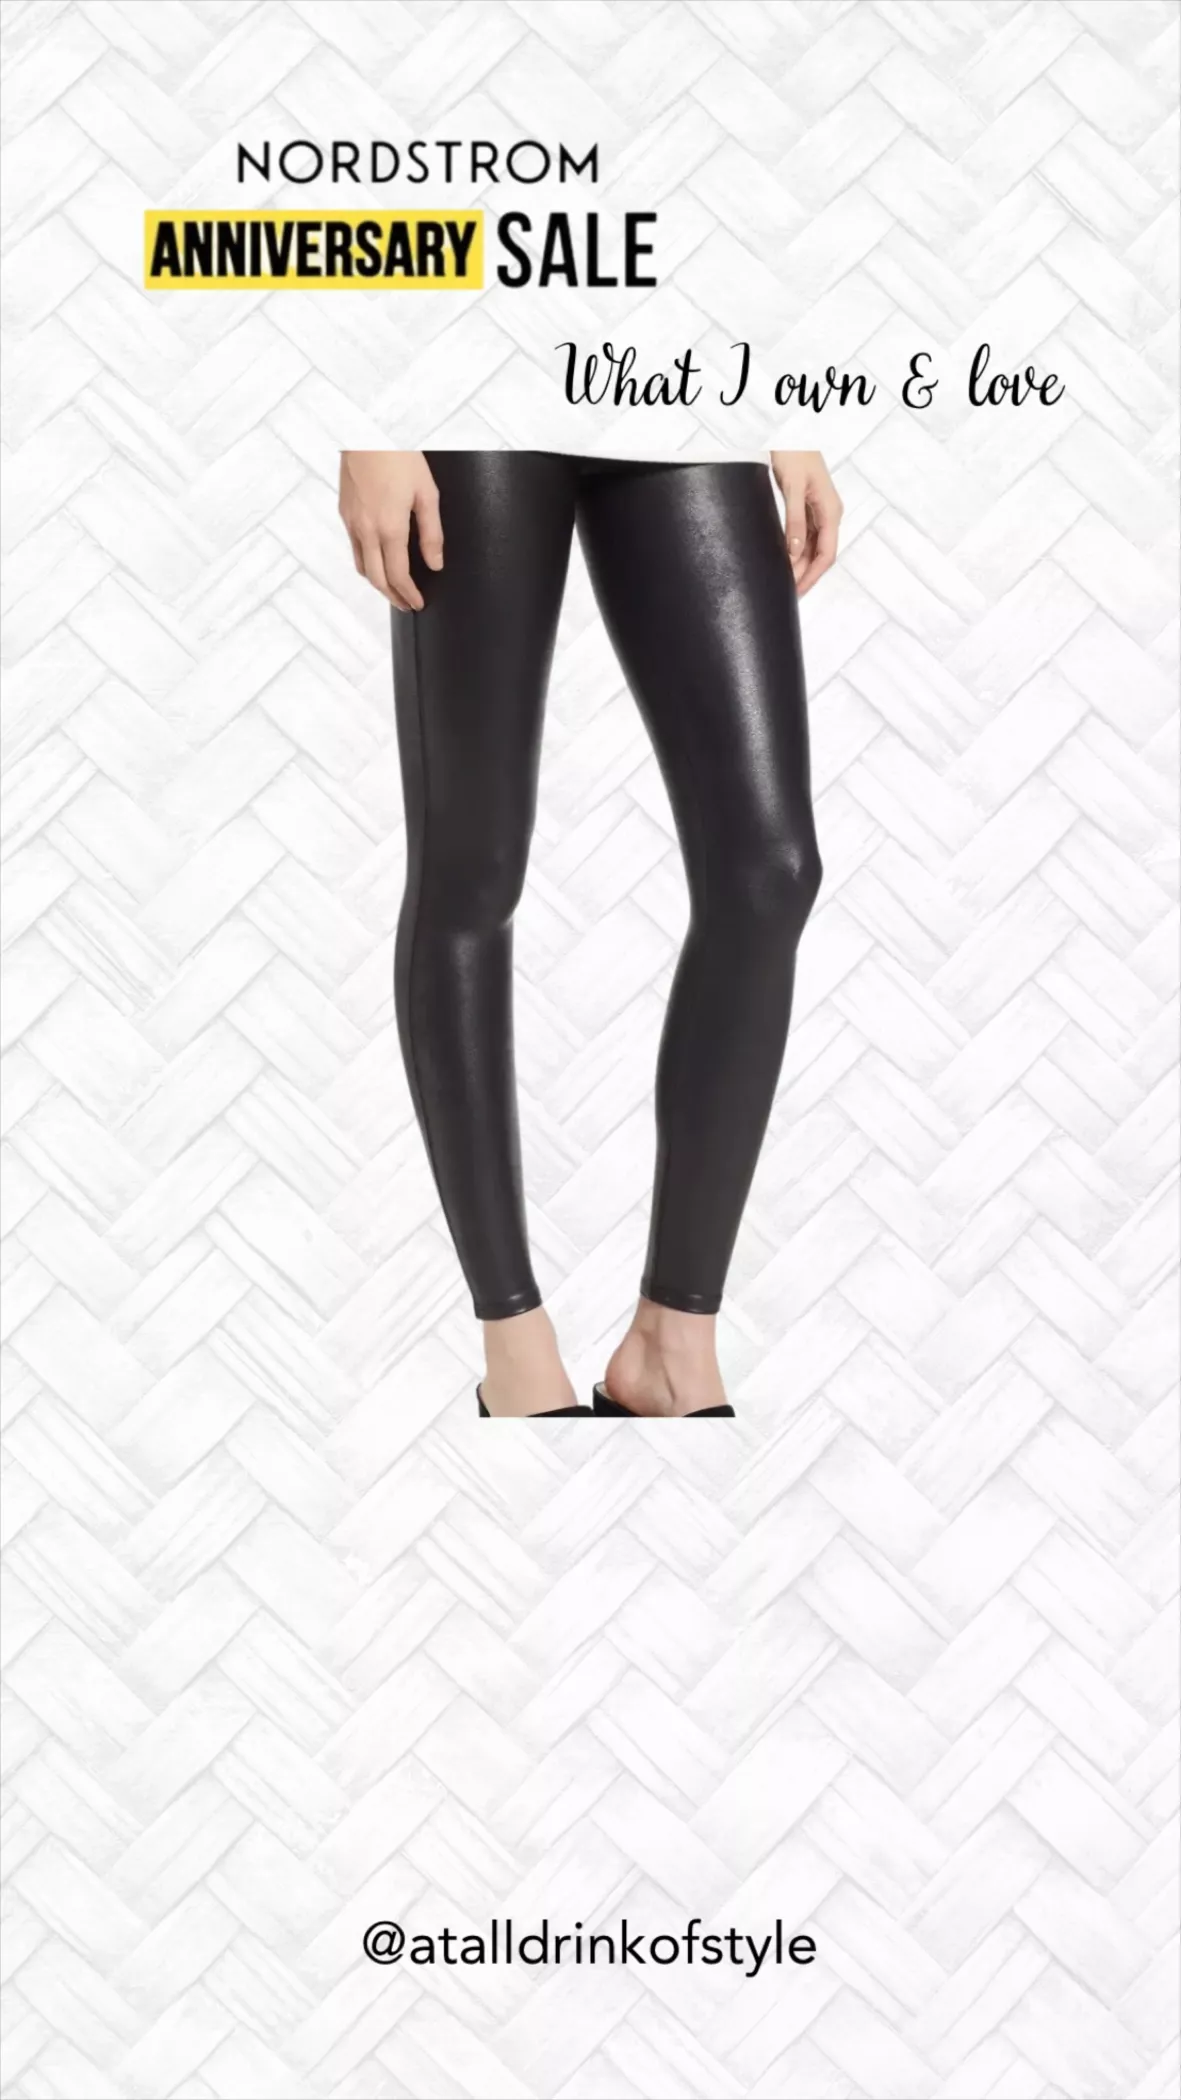 Buy Spanx faux leather leggings on sale at the Nordstrom